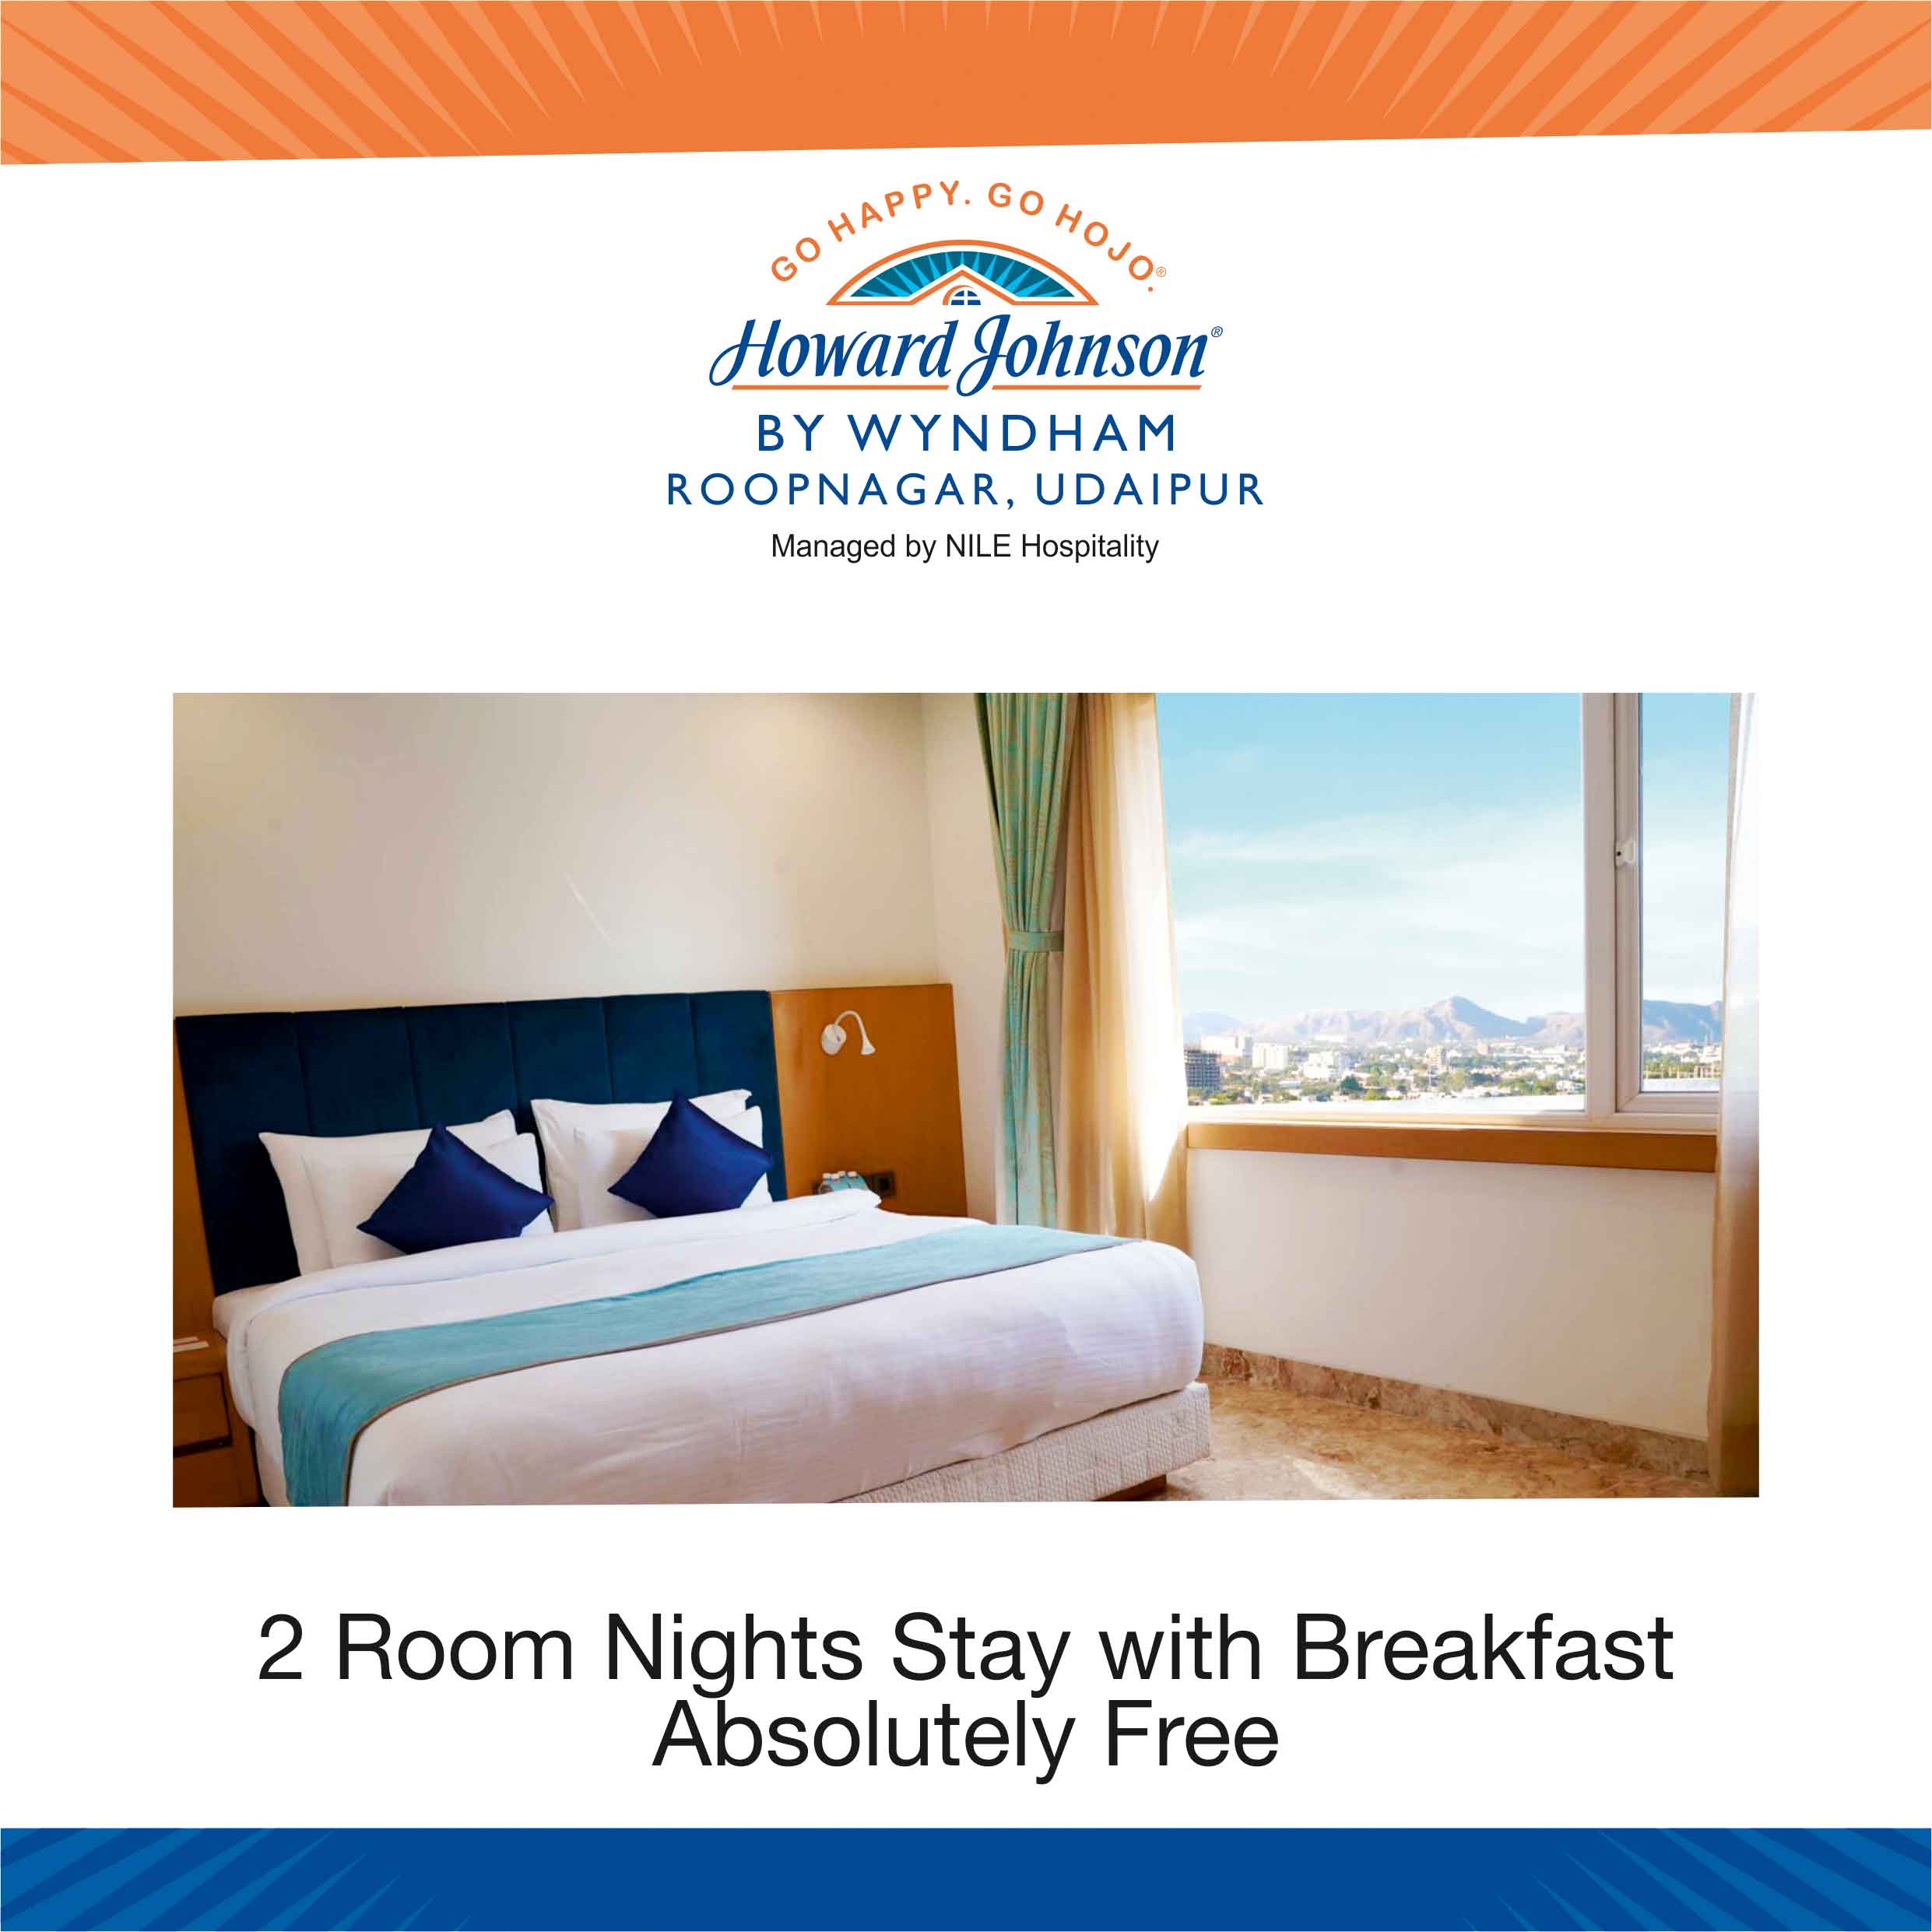 ADDMARC Hospitality Marketing Services Pvt. Ltd. on X: Howard Johnson  Udaipur- Membership Offers: ✔️2 Room Night Stay with Breakfast absolutely  FREE ✔️12 Lunch/Dinner Buffet absolutely FREE ✔️Buy 1 Get 1 Stay Offer